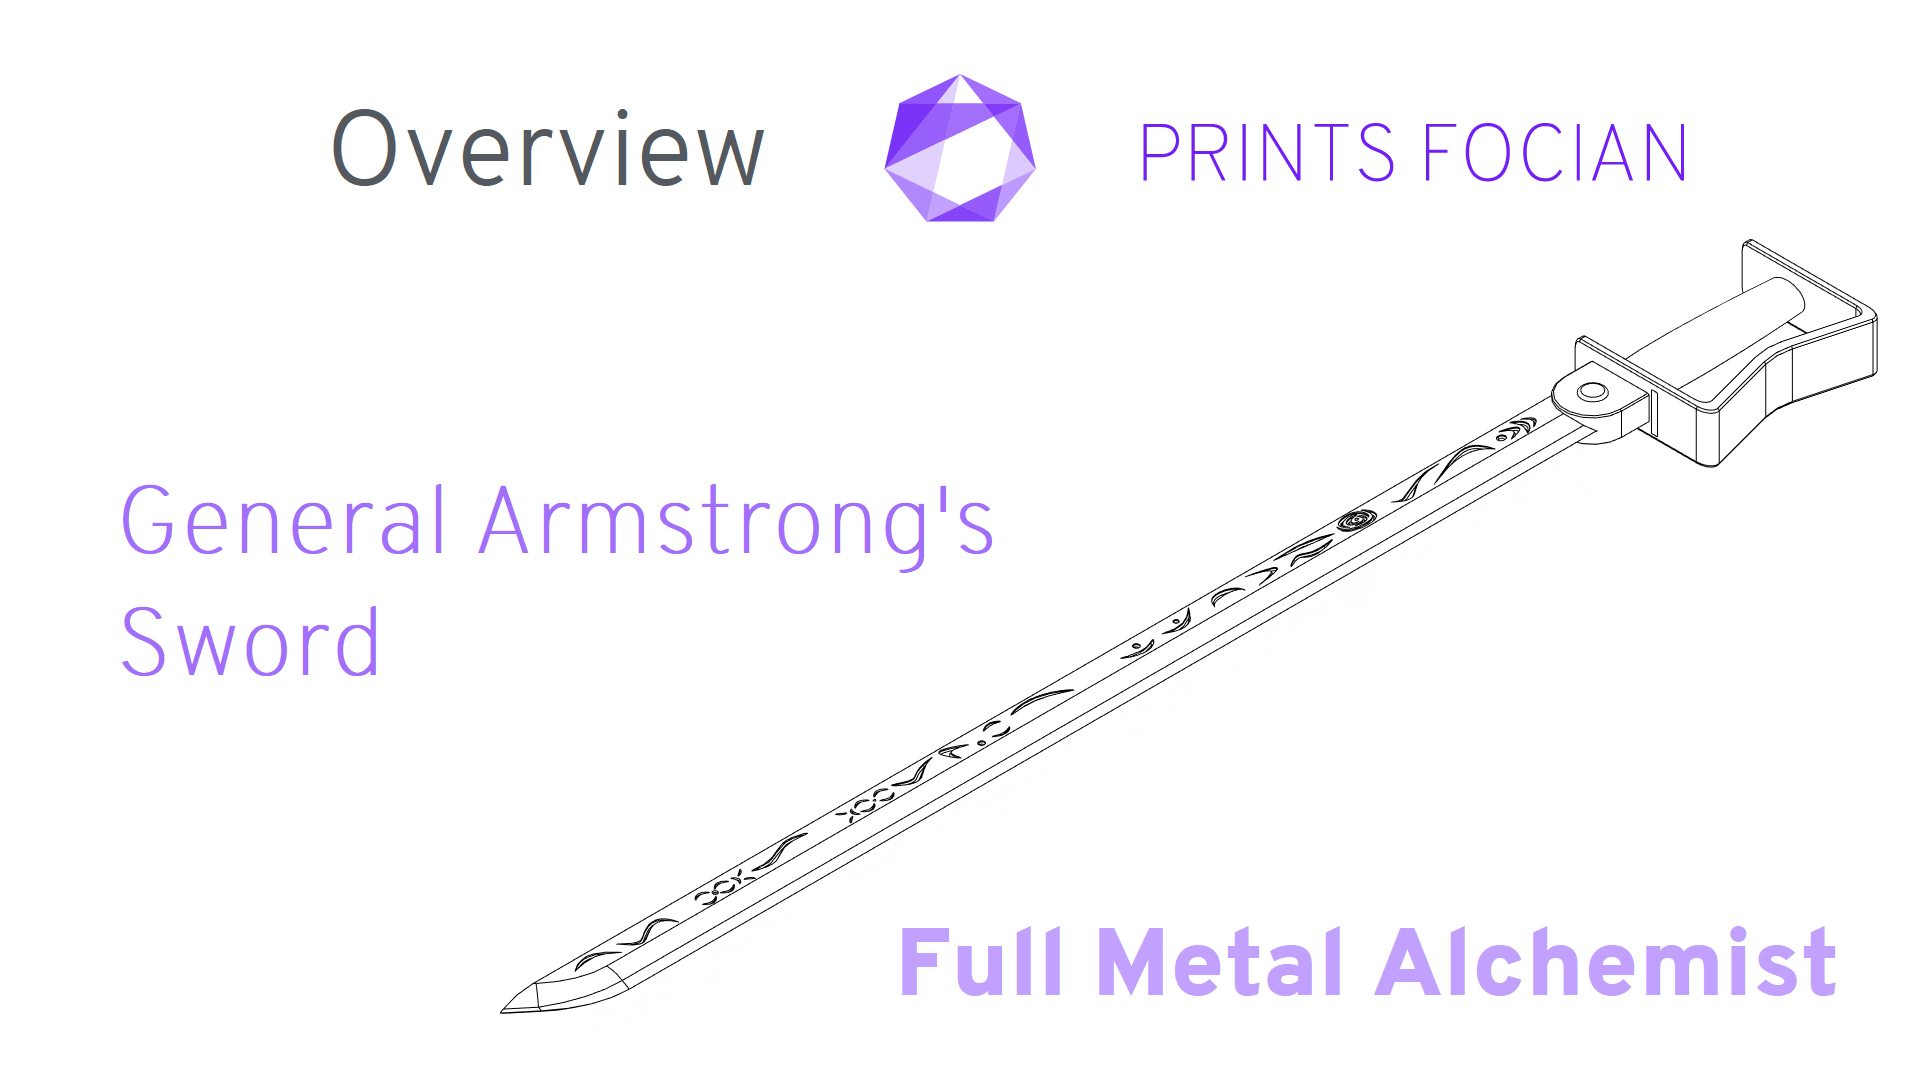 Wireframe image of the General Armstrong's Sword on a white background. Prints Focian Icon top and central. Text: Purple Prints Focian, General Armstrong's Sword, Full Metal Alchemist and dark grey Overview